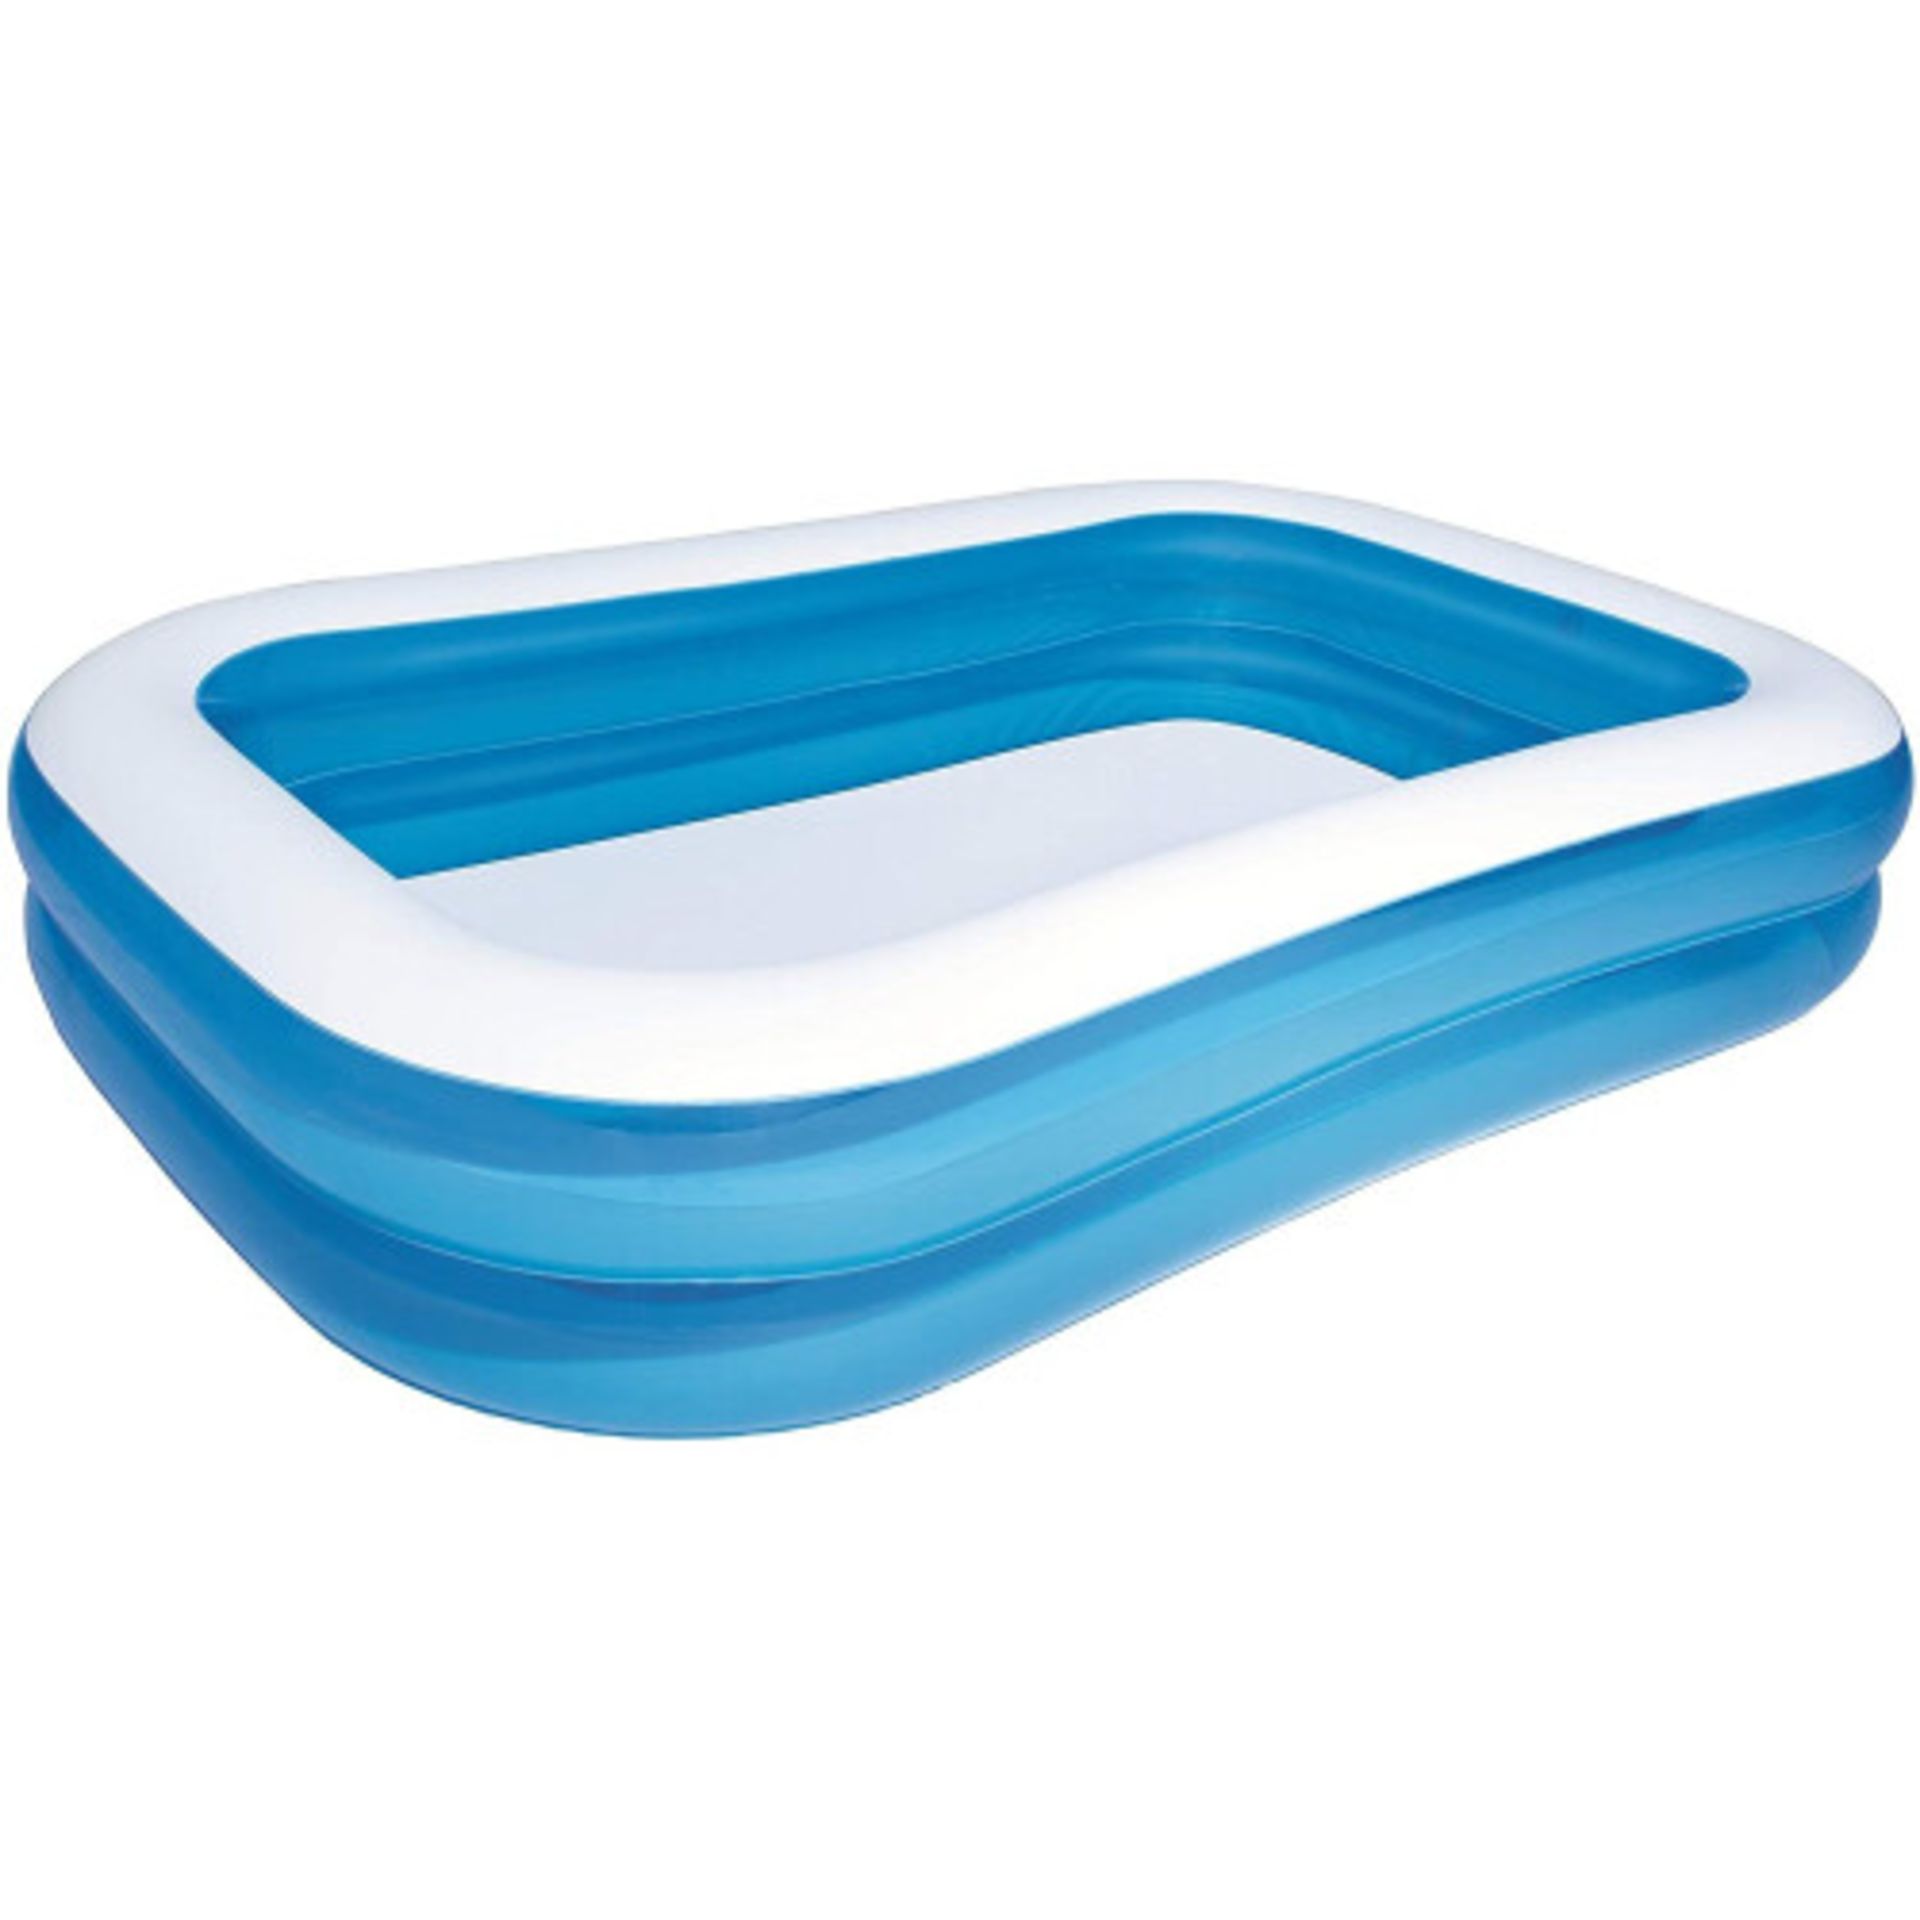 6 X BRAND NEW BESTWAY SPLASH AND PLAY LARGE FAMILY INFLATABLE SWIMMING POOL (2.62 M X 1.75 M X 51 CM - Image 2 of 2